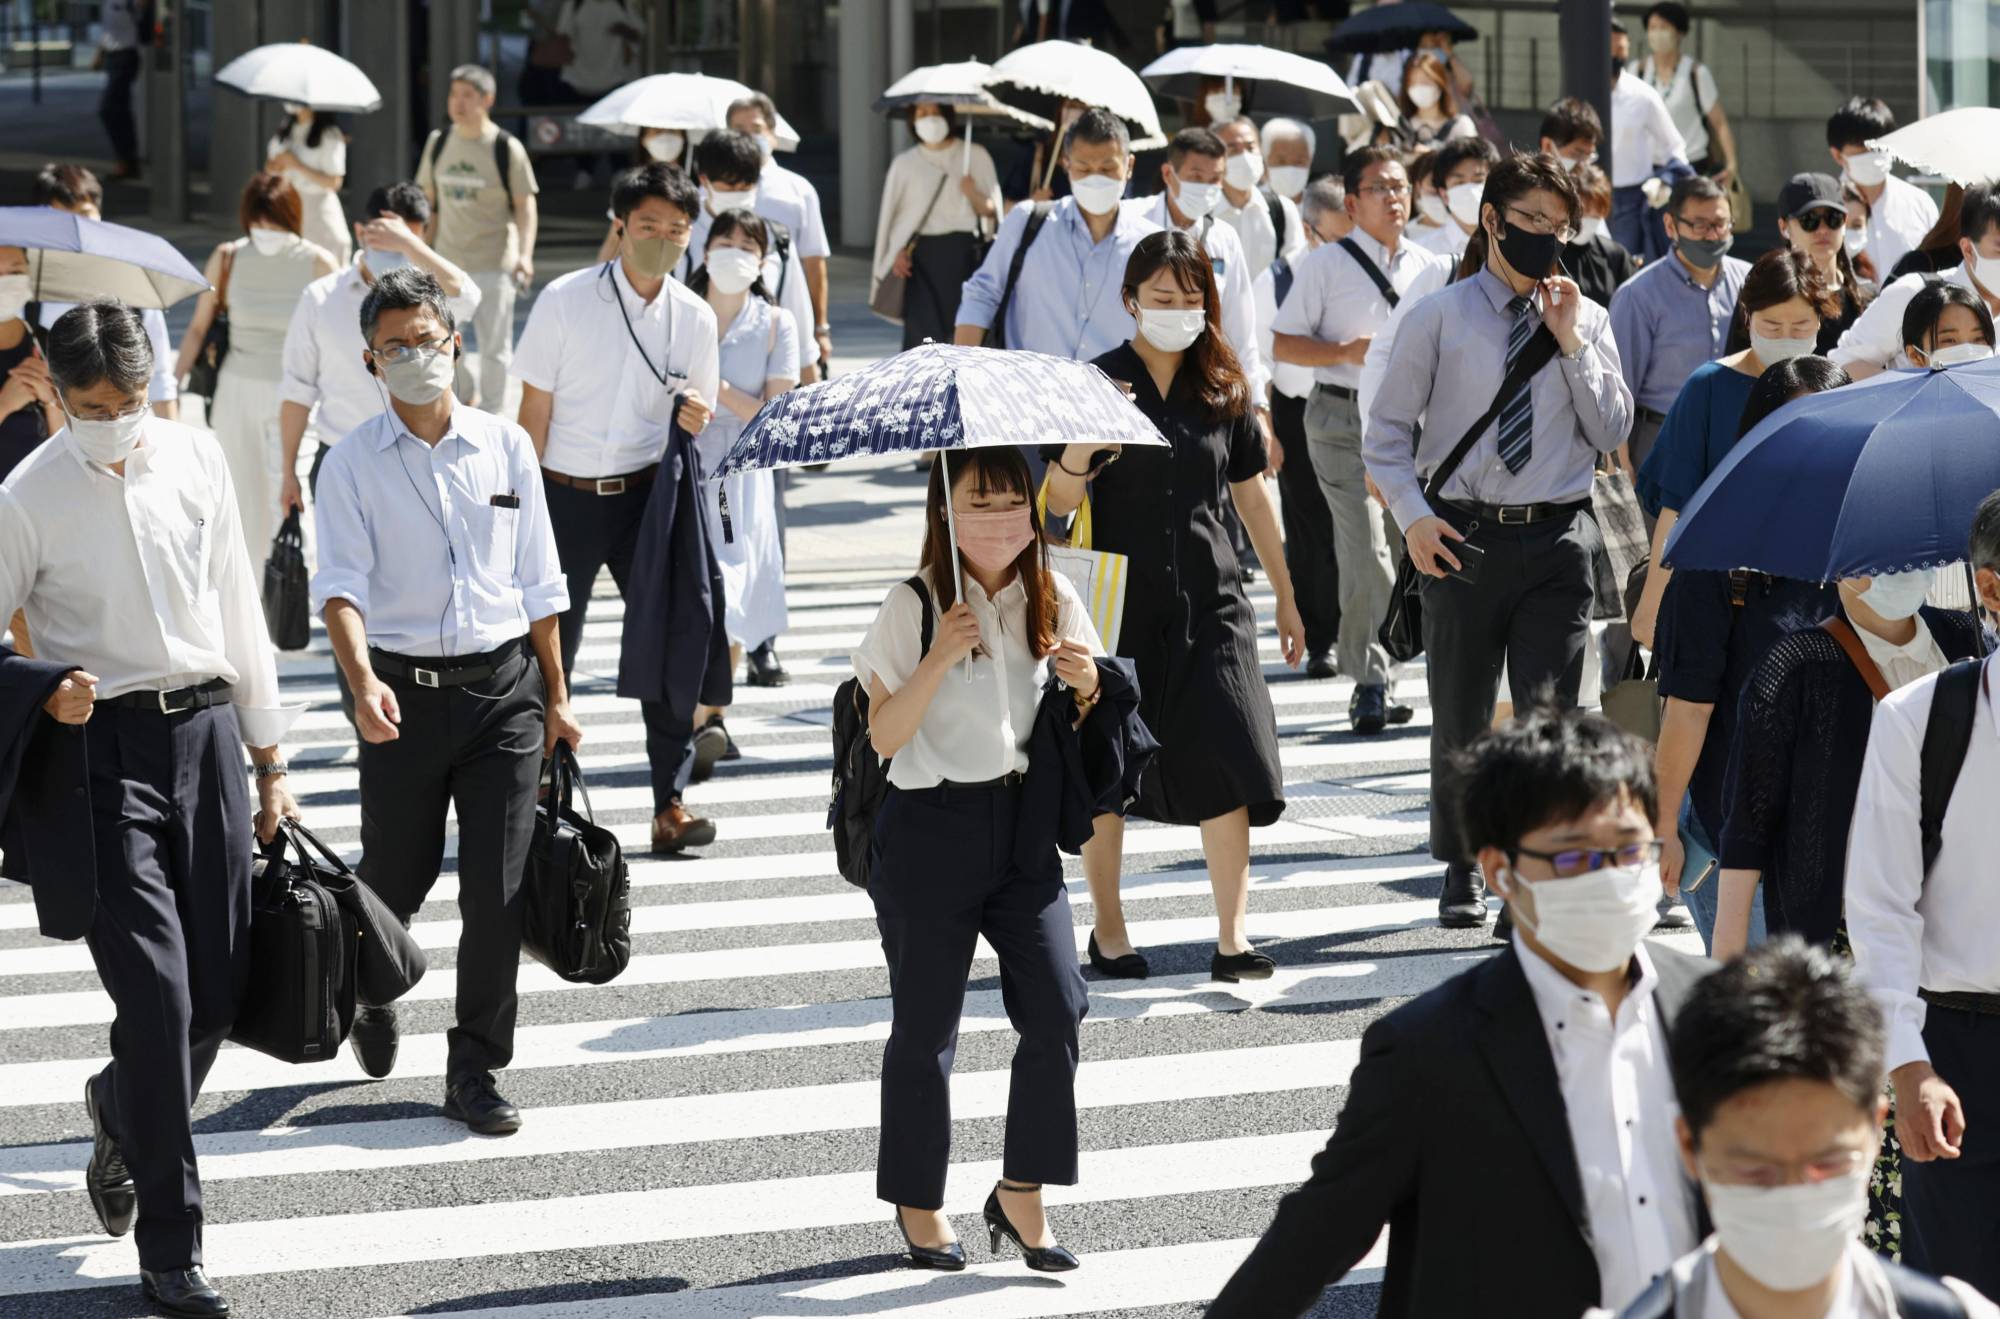 Most people wear masks even under sweltering heat in Tokyo on Monday. | KYODO